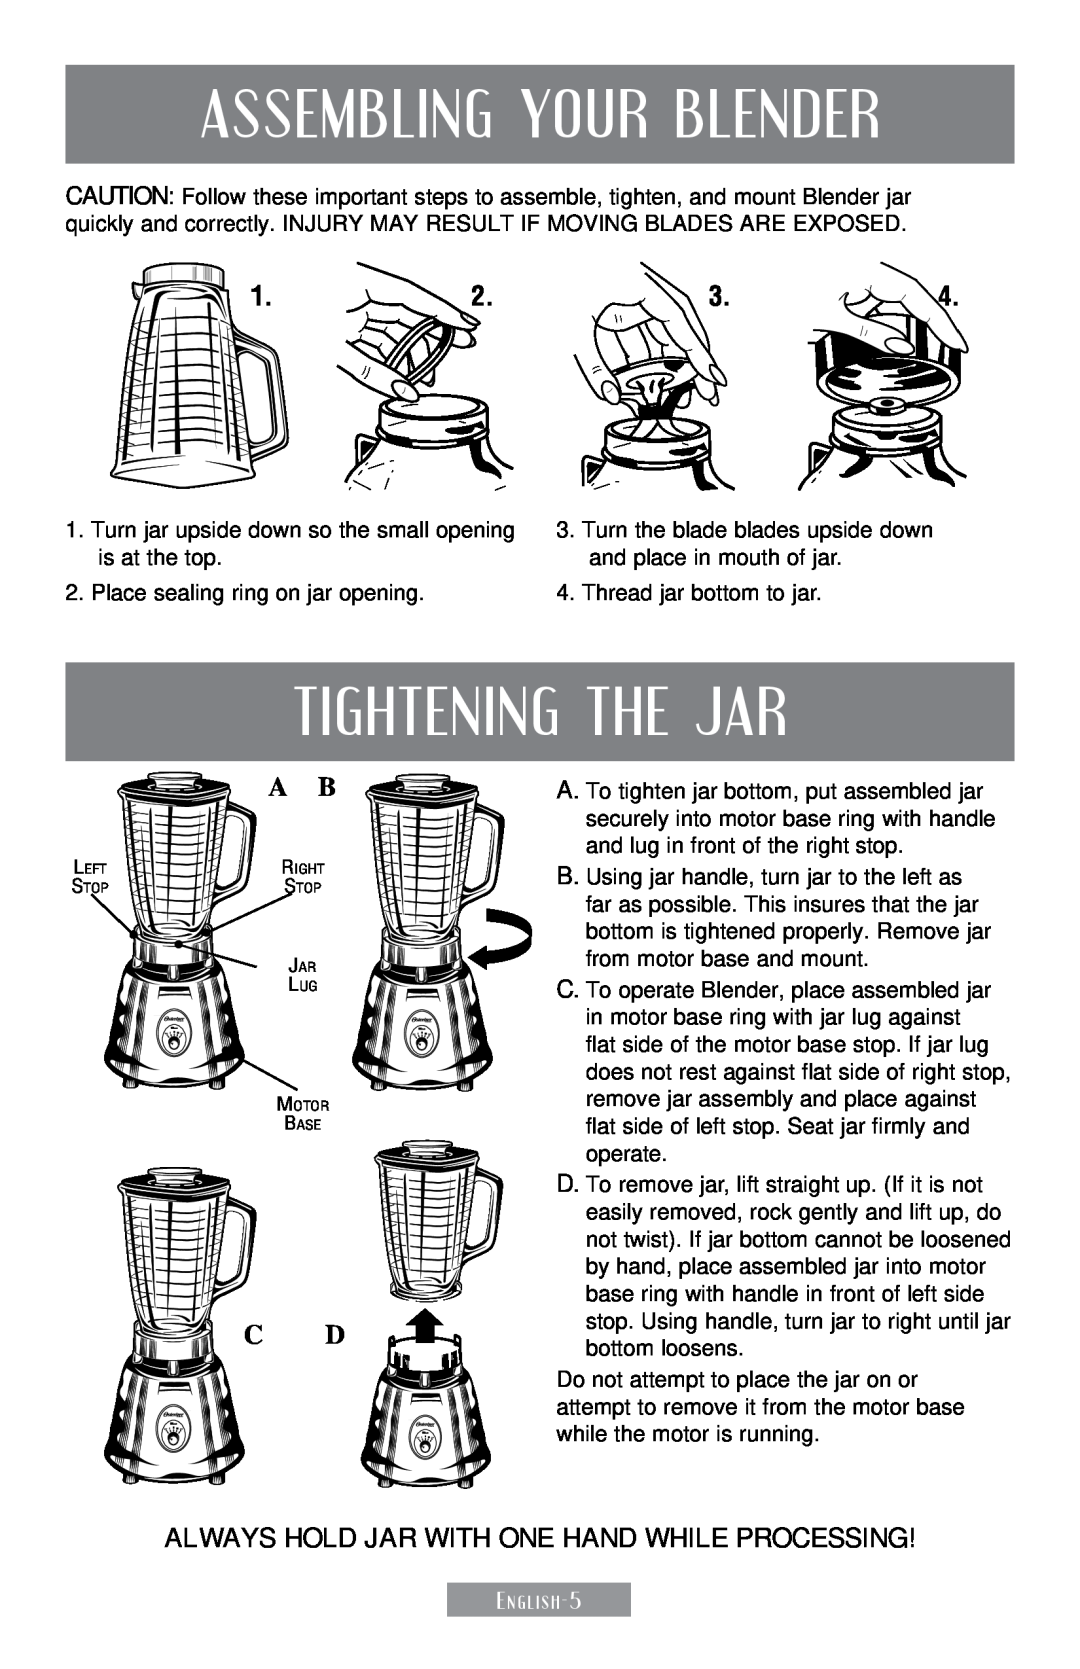 Sunbeam 250-22 Assembling Your Blender, Tightening The Jar, Always Hold Jar with One Hand While Processing 